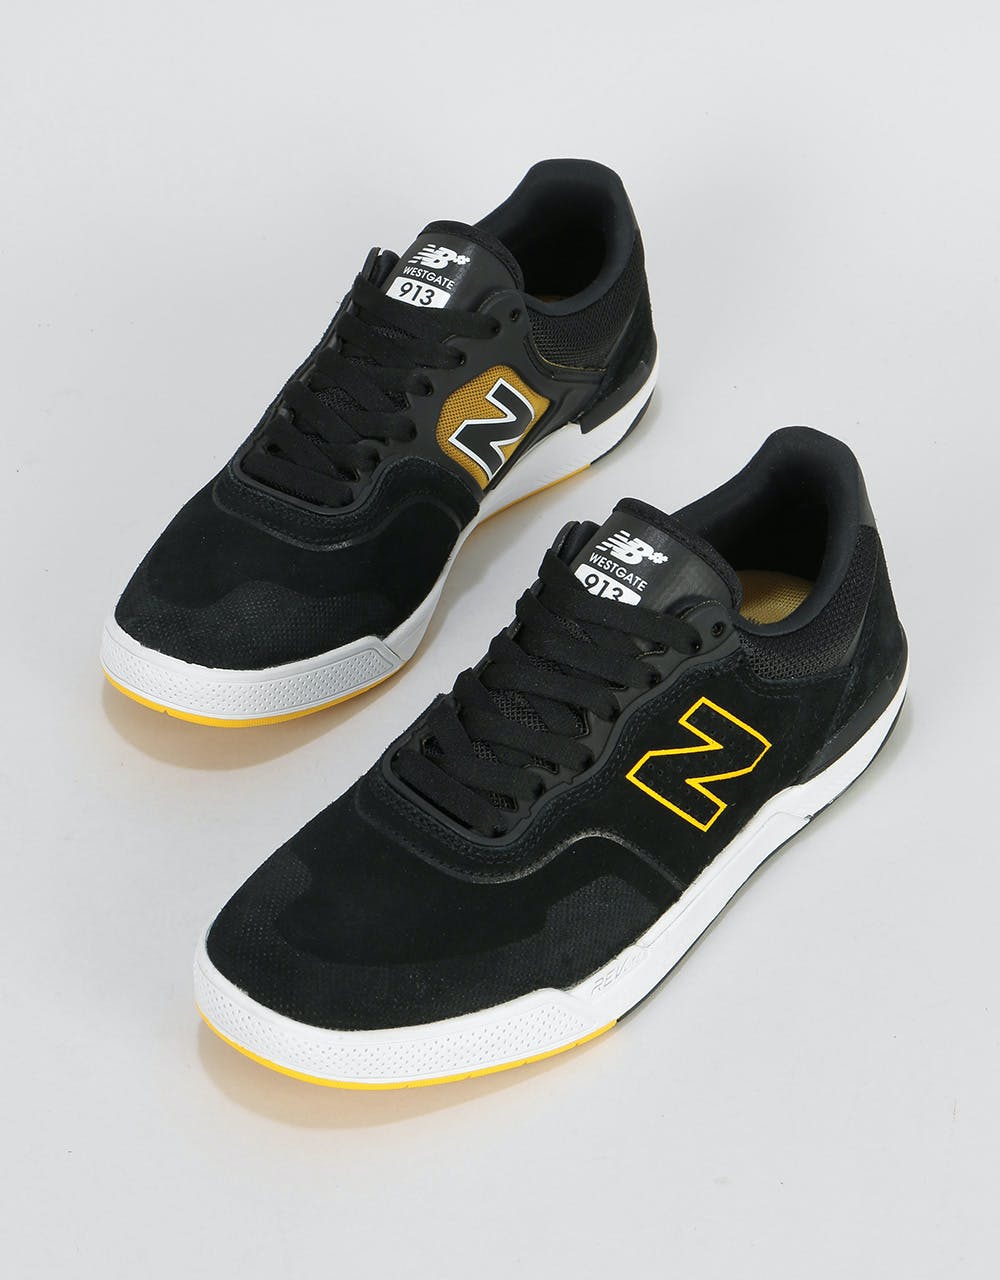 New Balance Numeric 913 Bee Skate Shoes - Black/Yellow